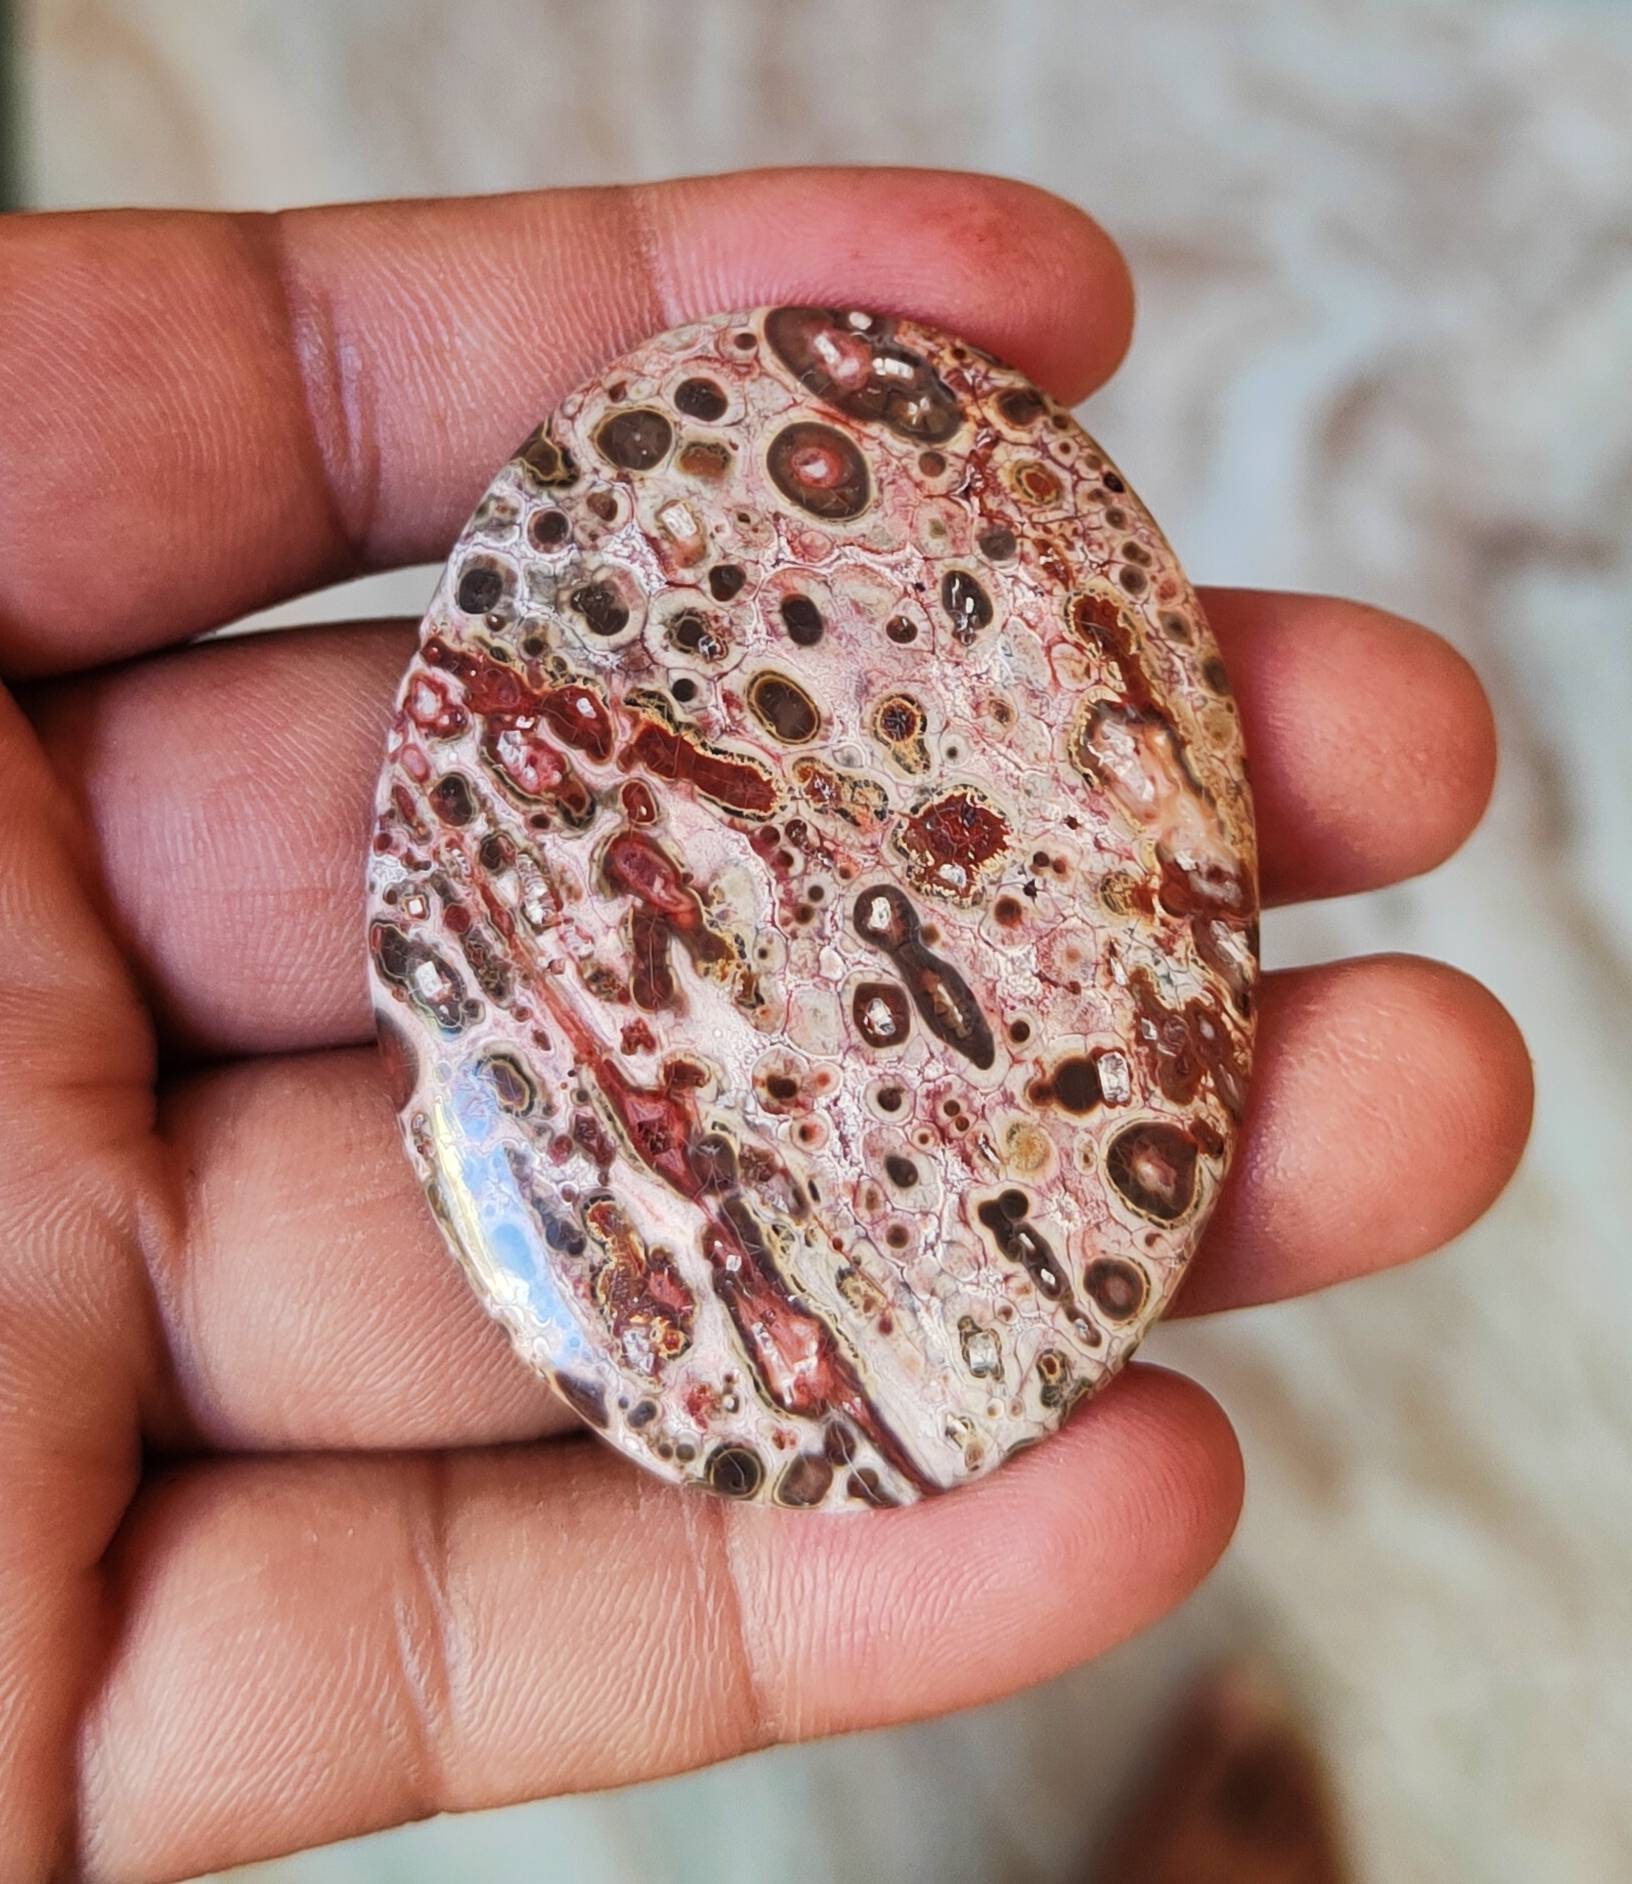 Only One Available Brown and Orange Jasper Cab 40x30mm Natural Leopard Skin Jasper Cabochon Large Oval One Of A Kind As Seen In Image